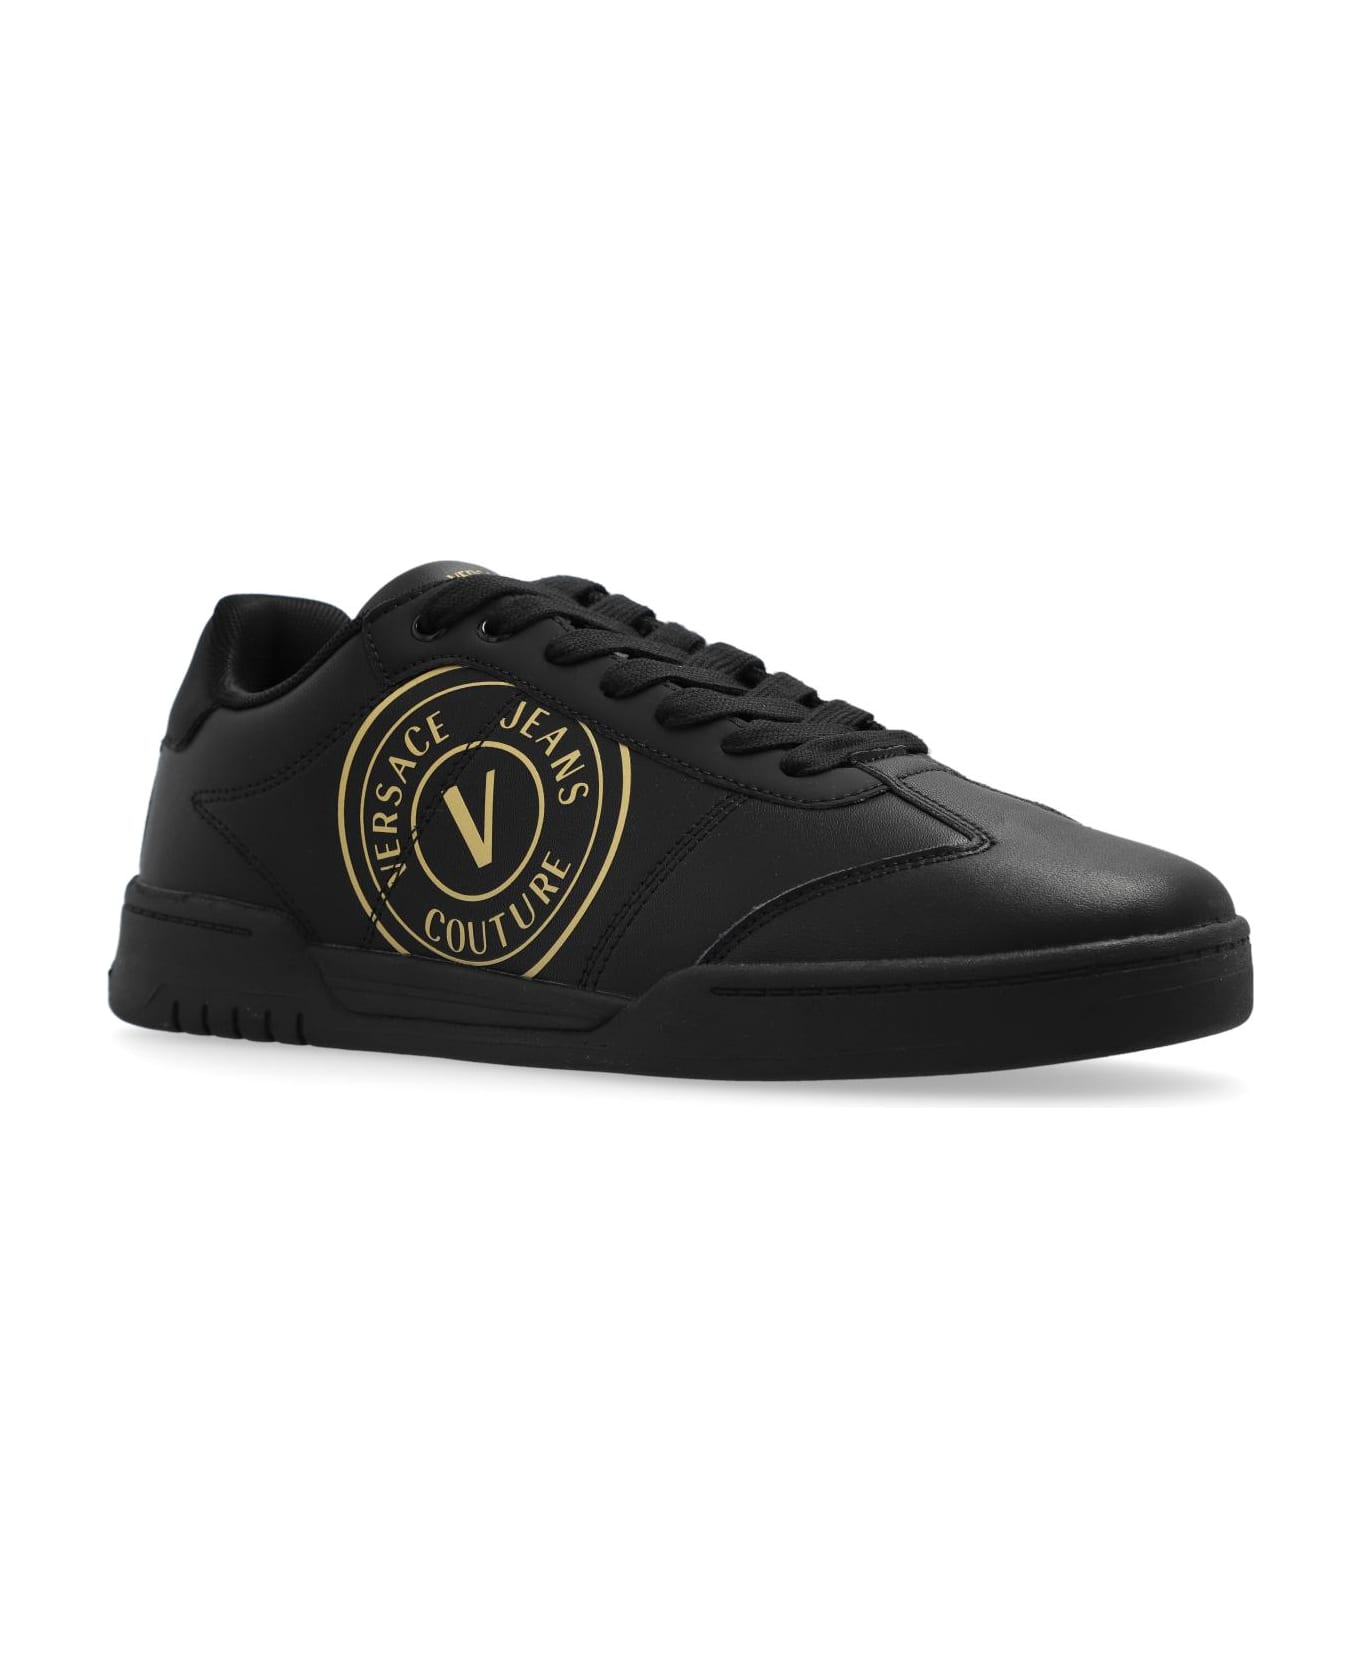 Versace Jeans Couture Fondo Brooklyn Dis. Shoes - BLACK/GOLD